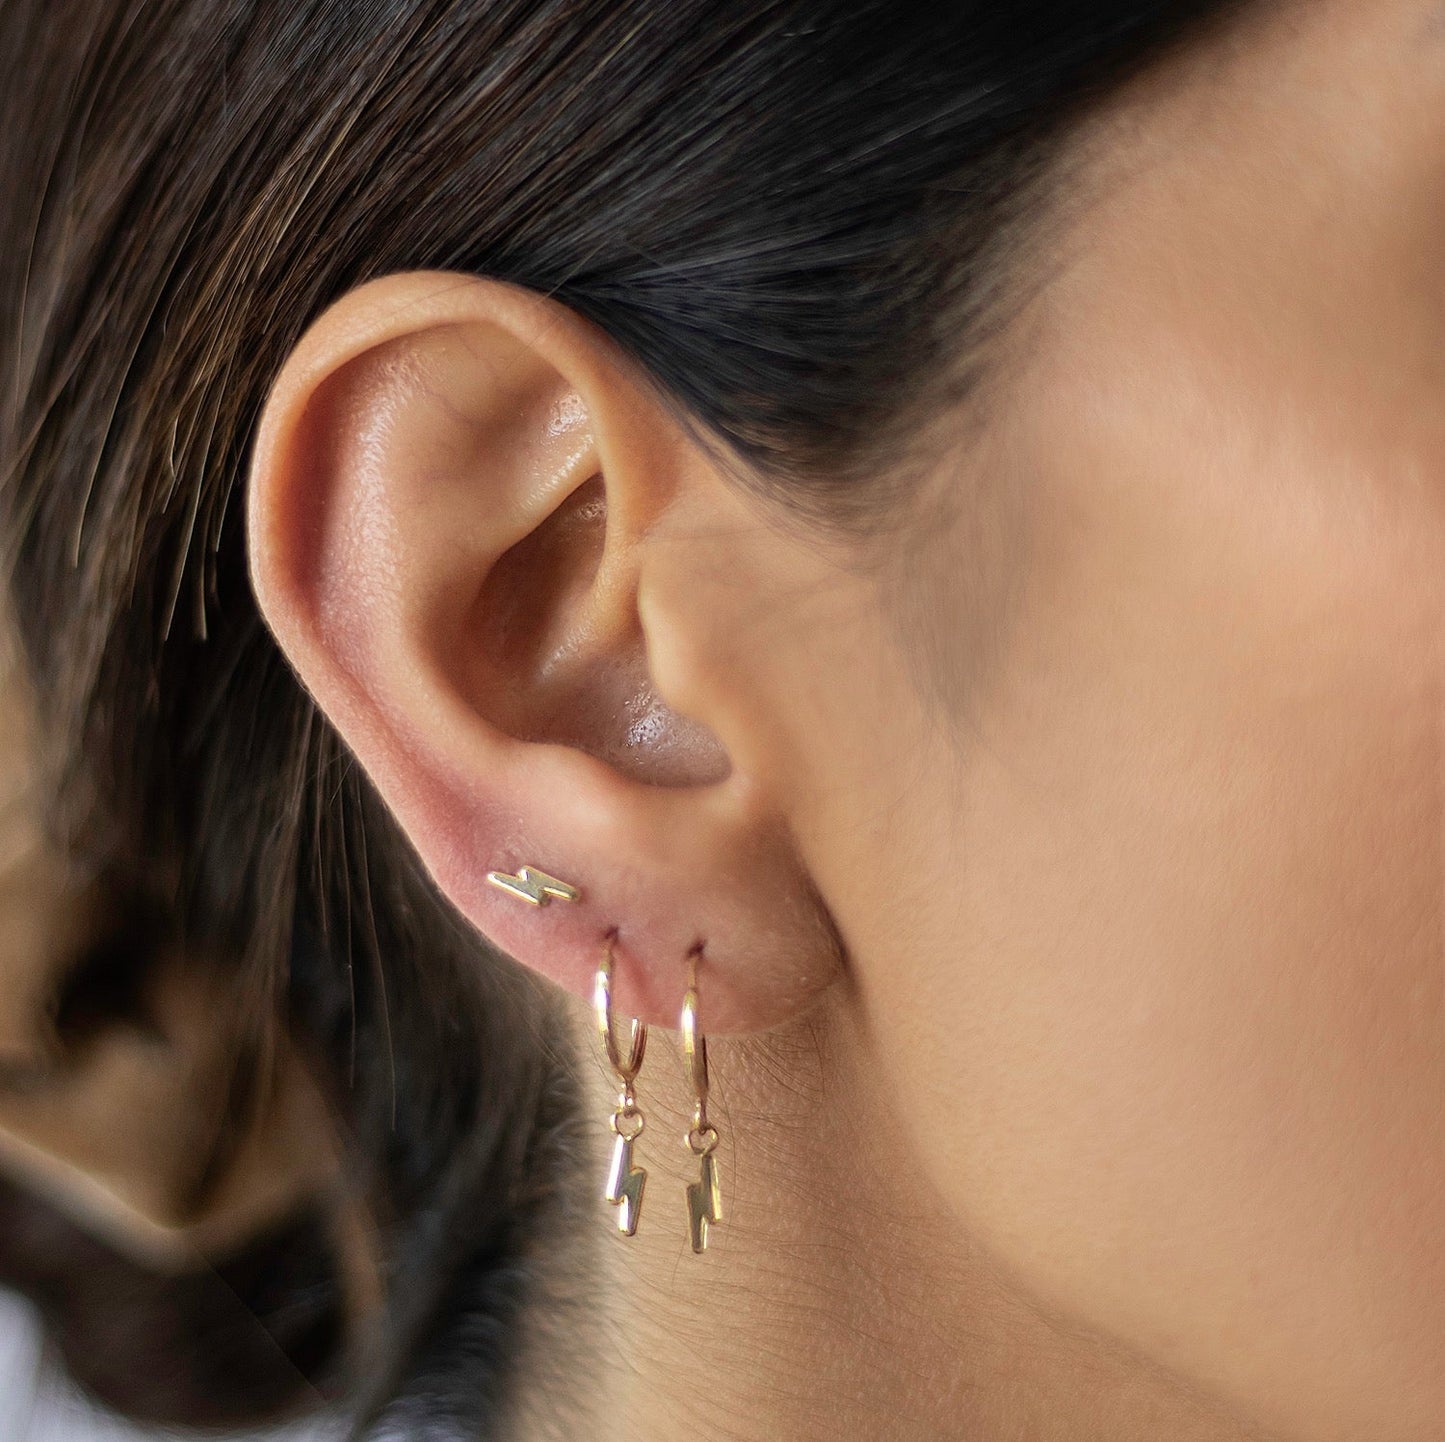 These tiny hoop earrings feature a lightening bolt design on the front and are 10k gold plated. The lightweight hoops make them perfect for wearing with studs or other small earrings so you can stack up the sparkle!